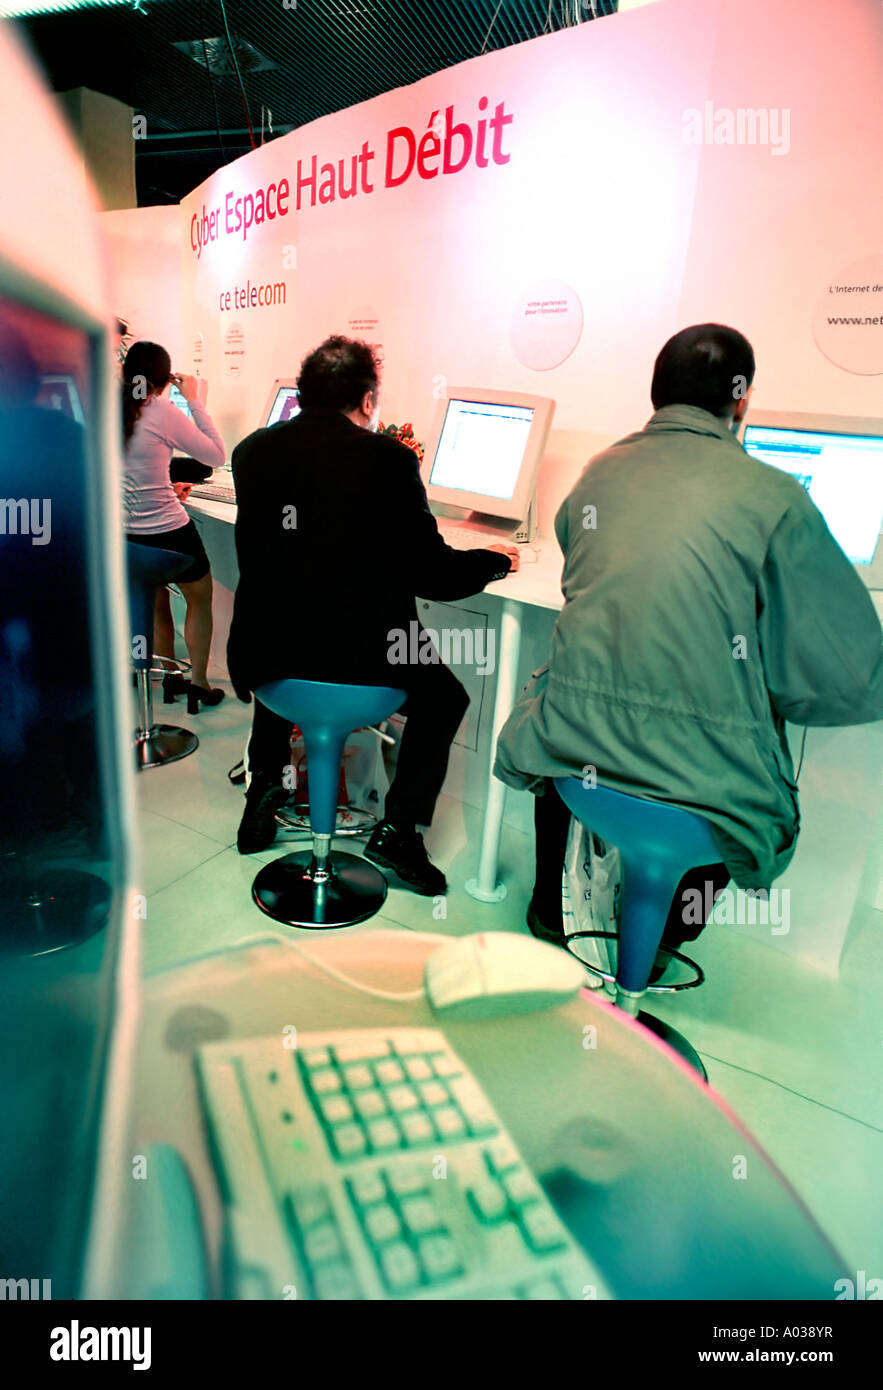 PARIS France, High Speed ADSL Access to Internet Service Businessmen  Browsing the Internet, Trying Product, people working Stock Photo - Alamy